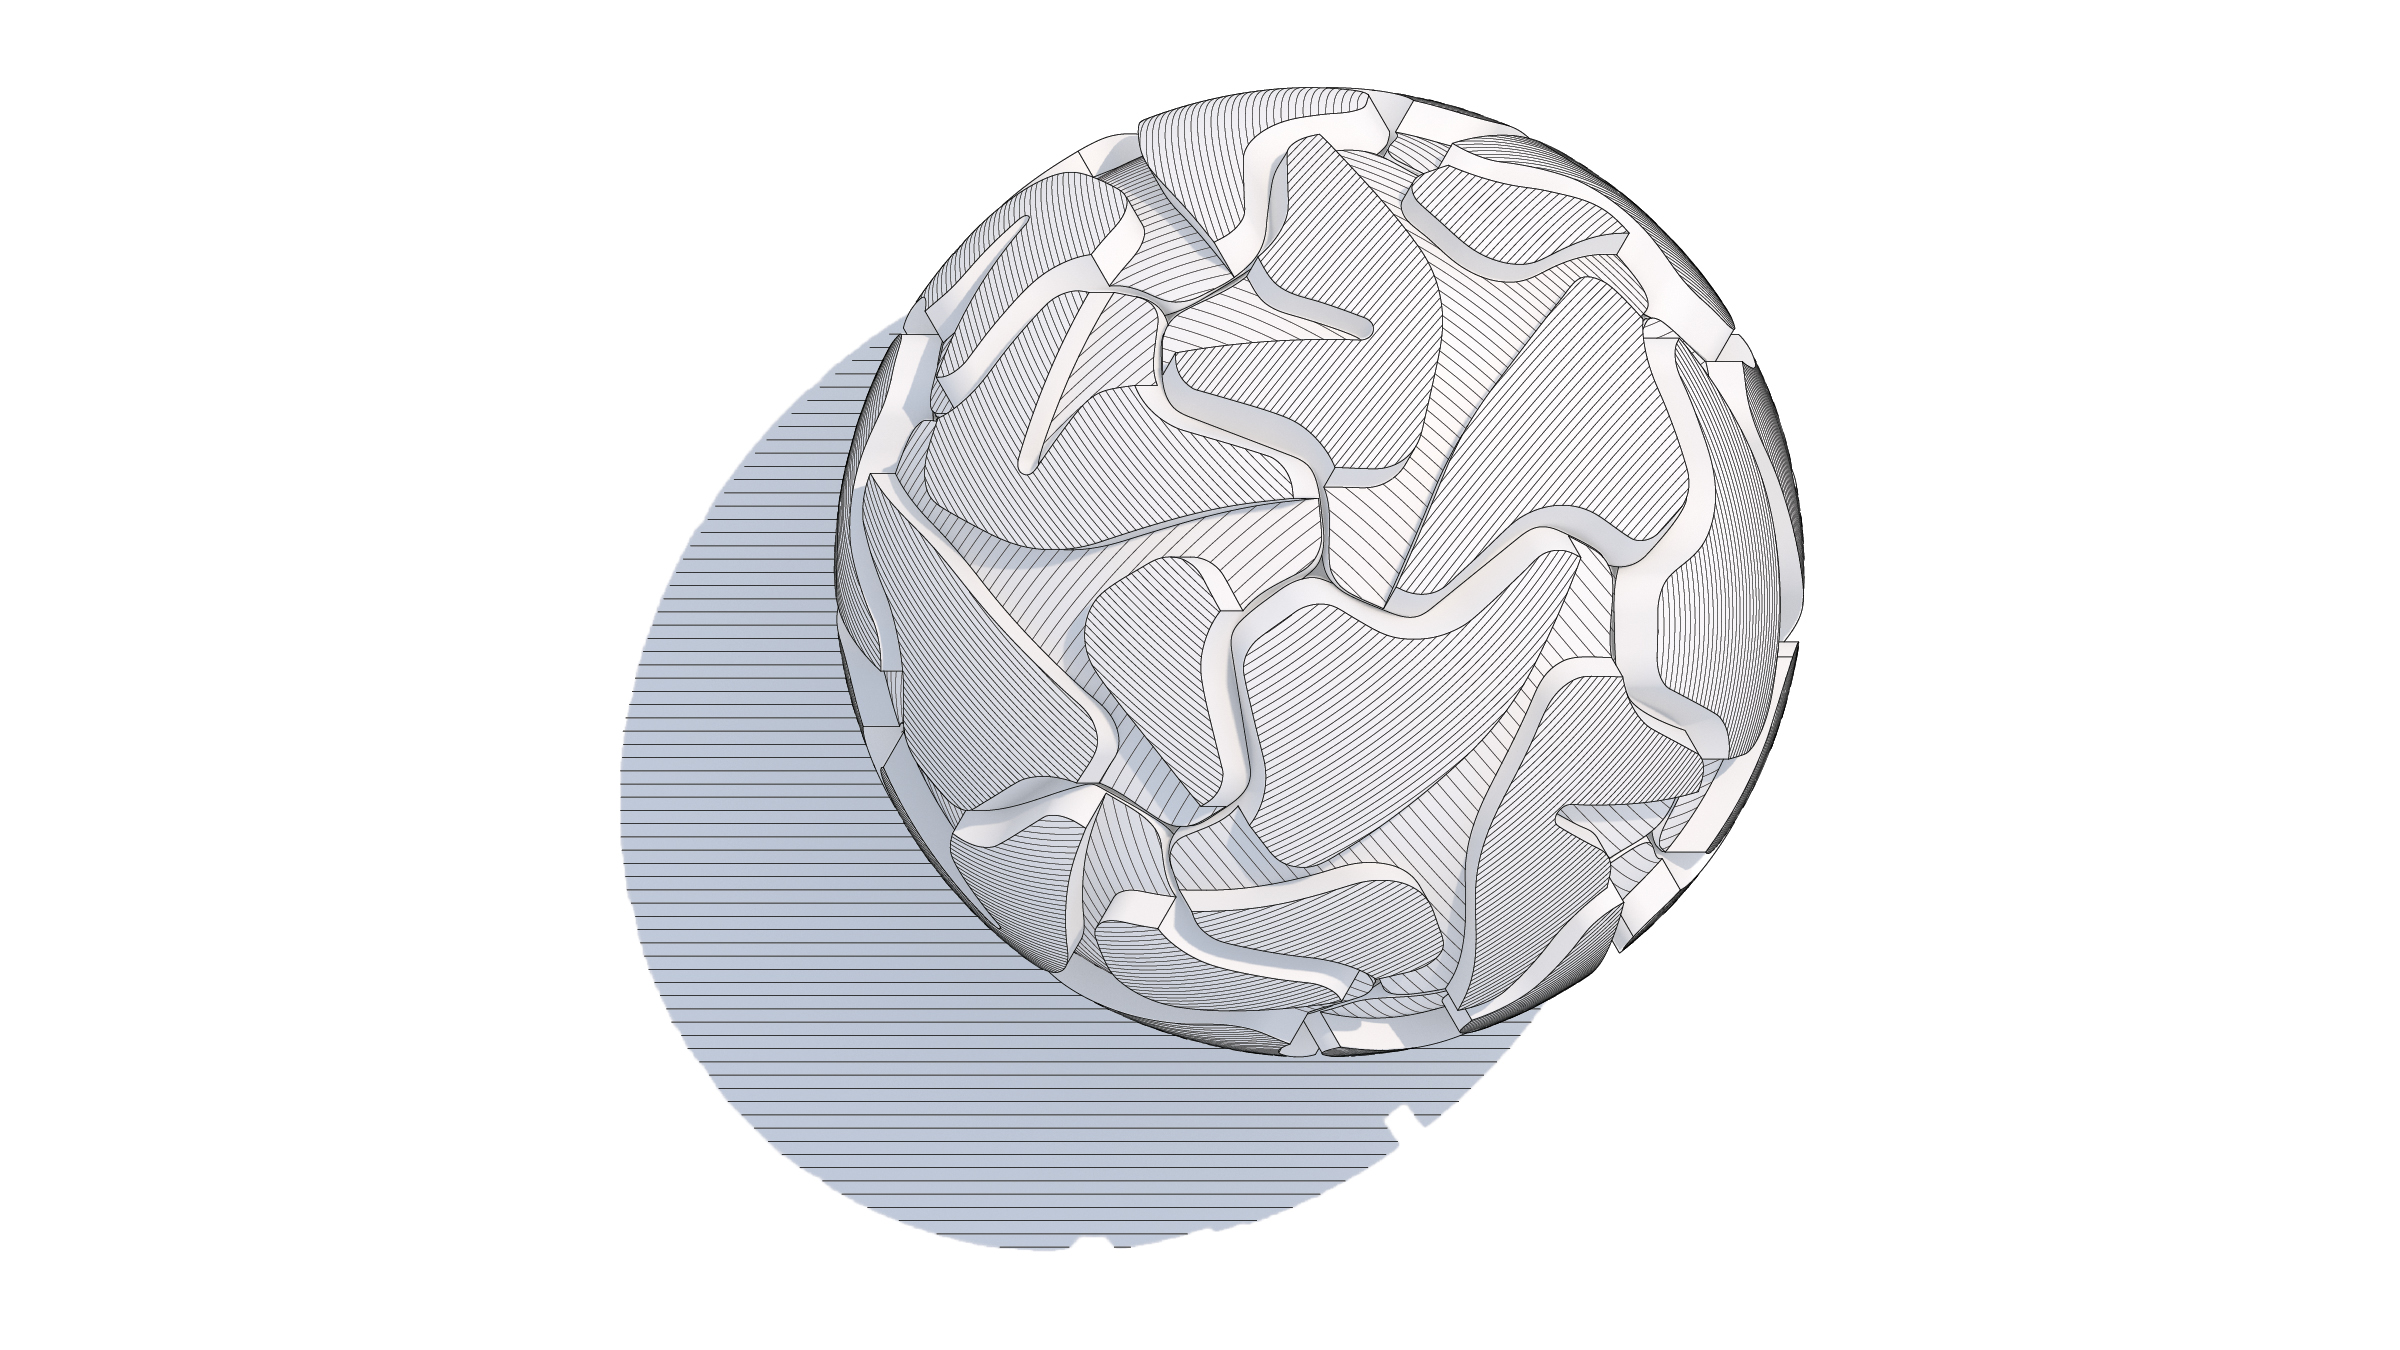 sphere with nested figures images7.jpg